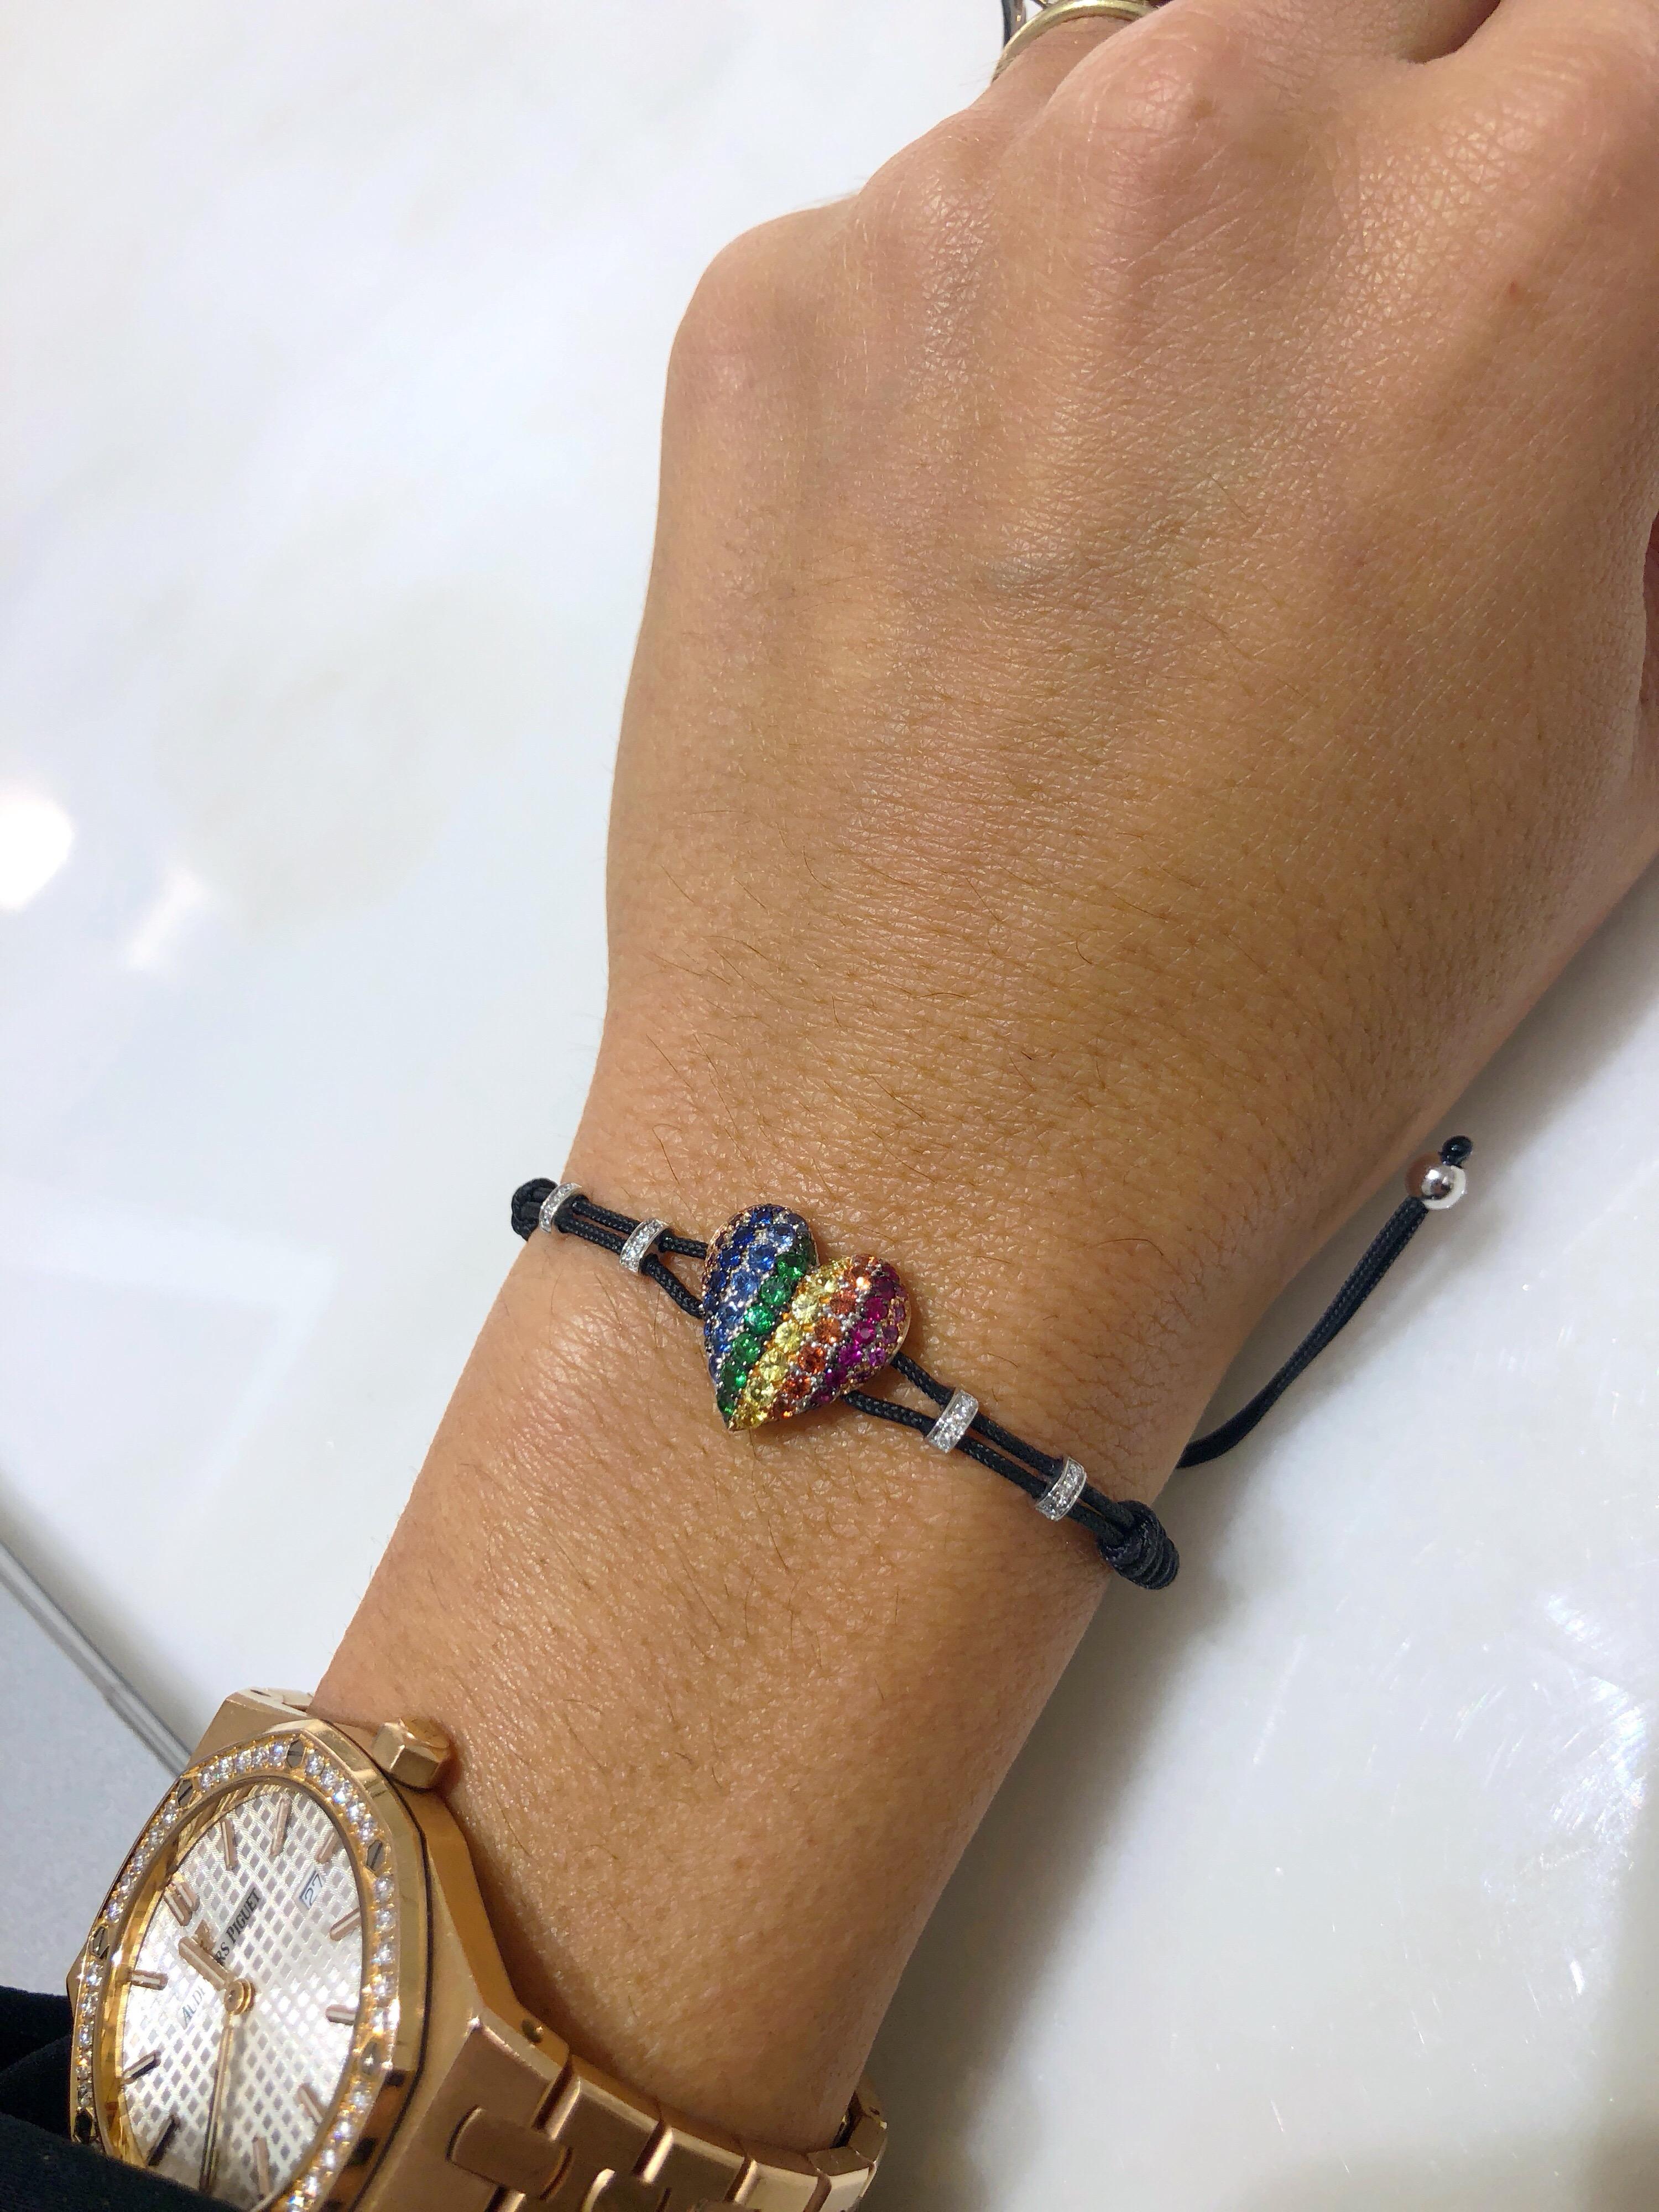 This Pippo Perez Rainbow Heart Bracelet is set in 18-karat white gold and features 0.03 carats of amethysts, 0.30 carats of blue sapphires, 0.23 carats of green tsavorites, 0.23 carats of yellow sapphires, 0.27 carats of orange sapphires, 0.12